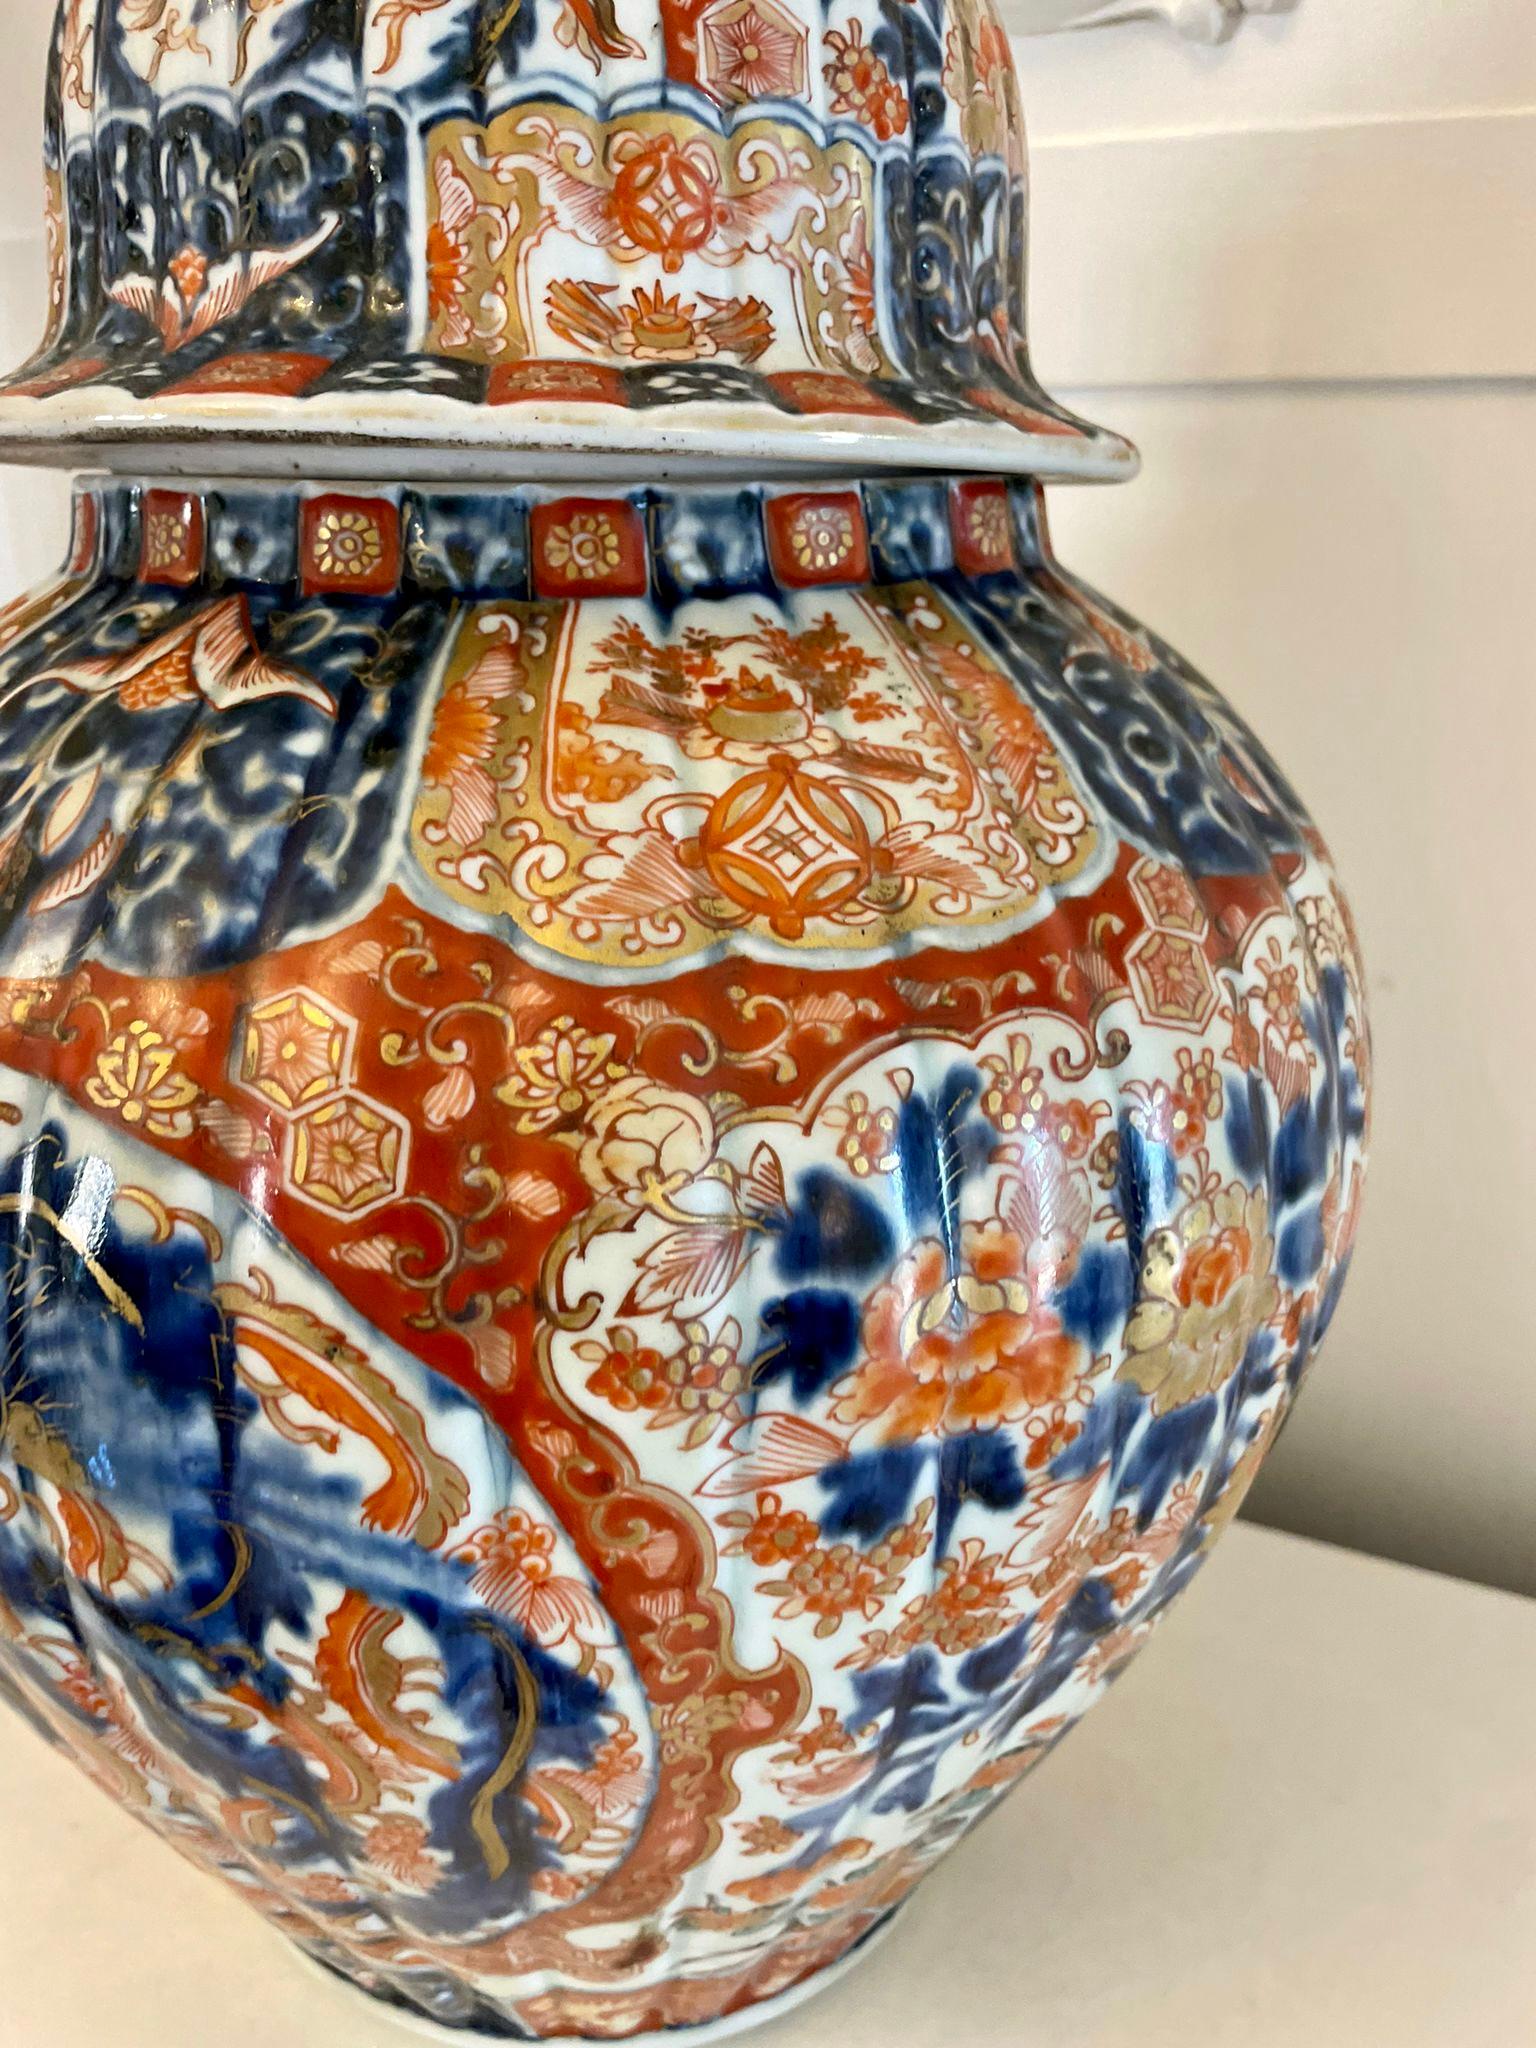 Large antique 19th century quality Imari lidded vase boasting a dog of foo to the lid and wonderful hand painted decoration in red, blue, white and gold colours

A spectacular example of desirable proportions in perfect original